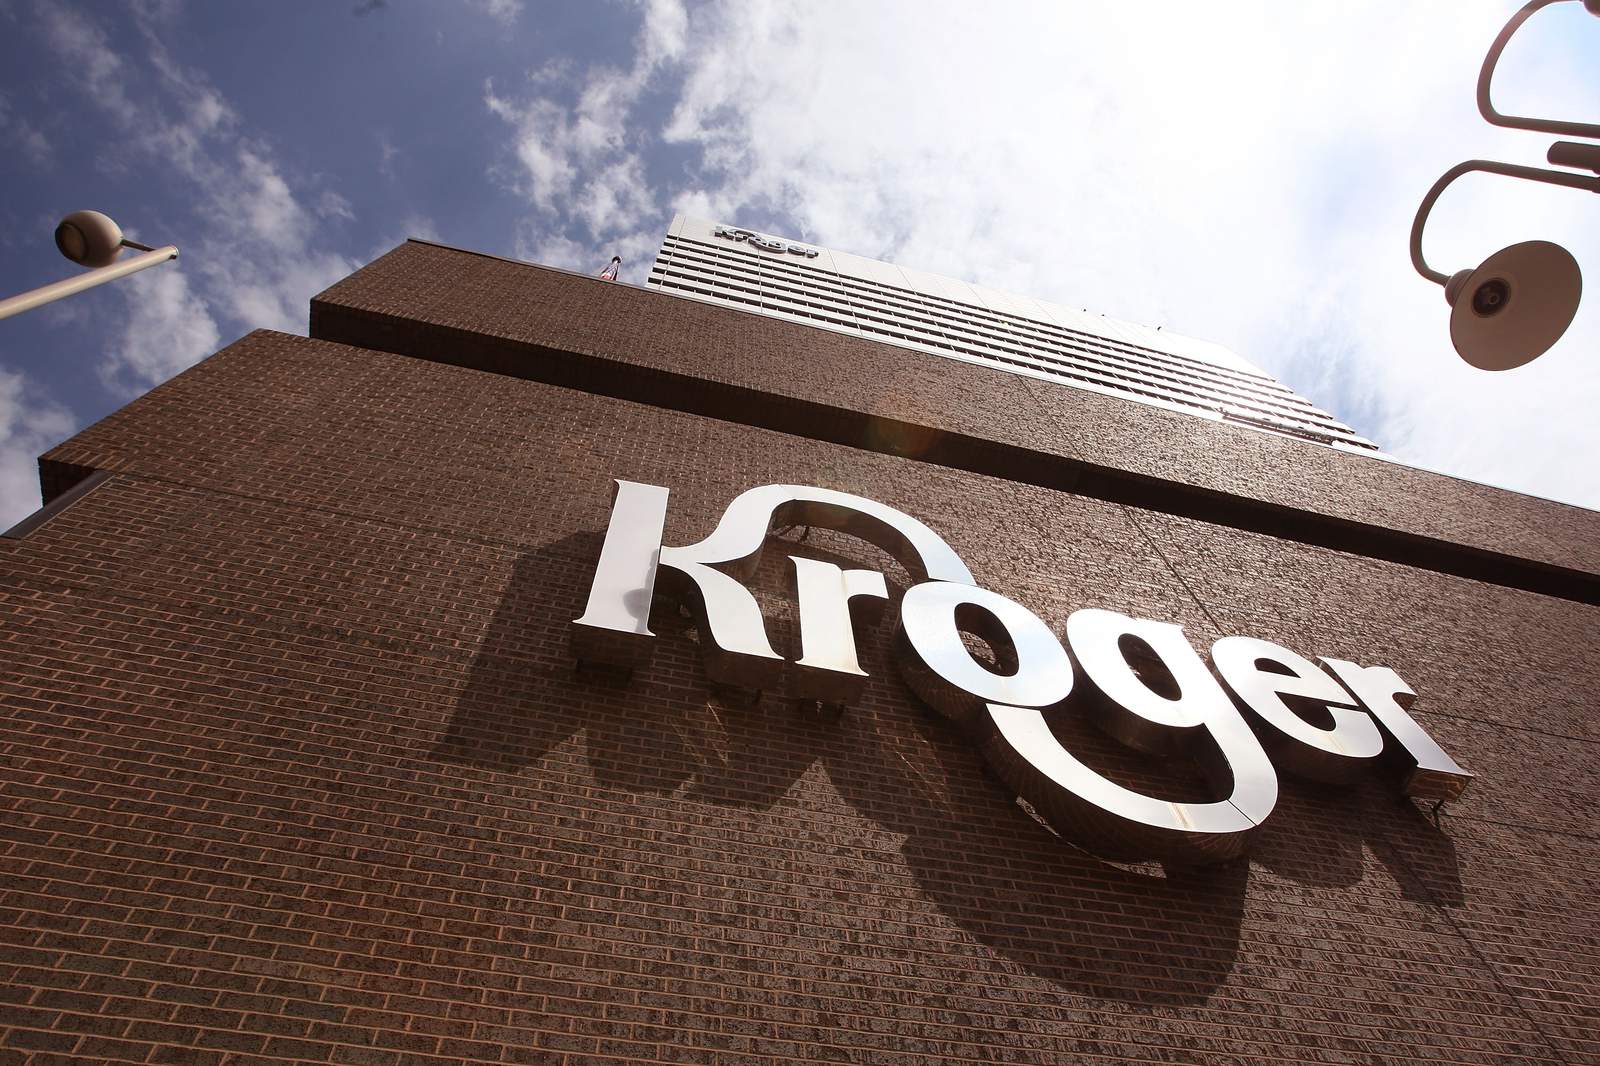 Kroger to invest $95 million and create 250 jobs in Romulus through new customer fulfillment center